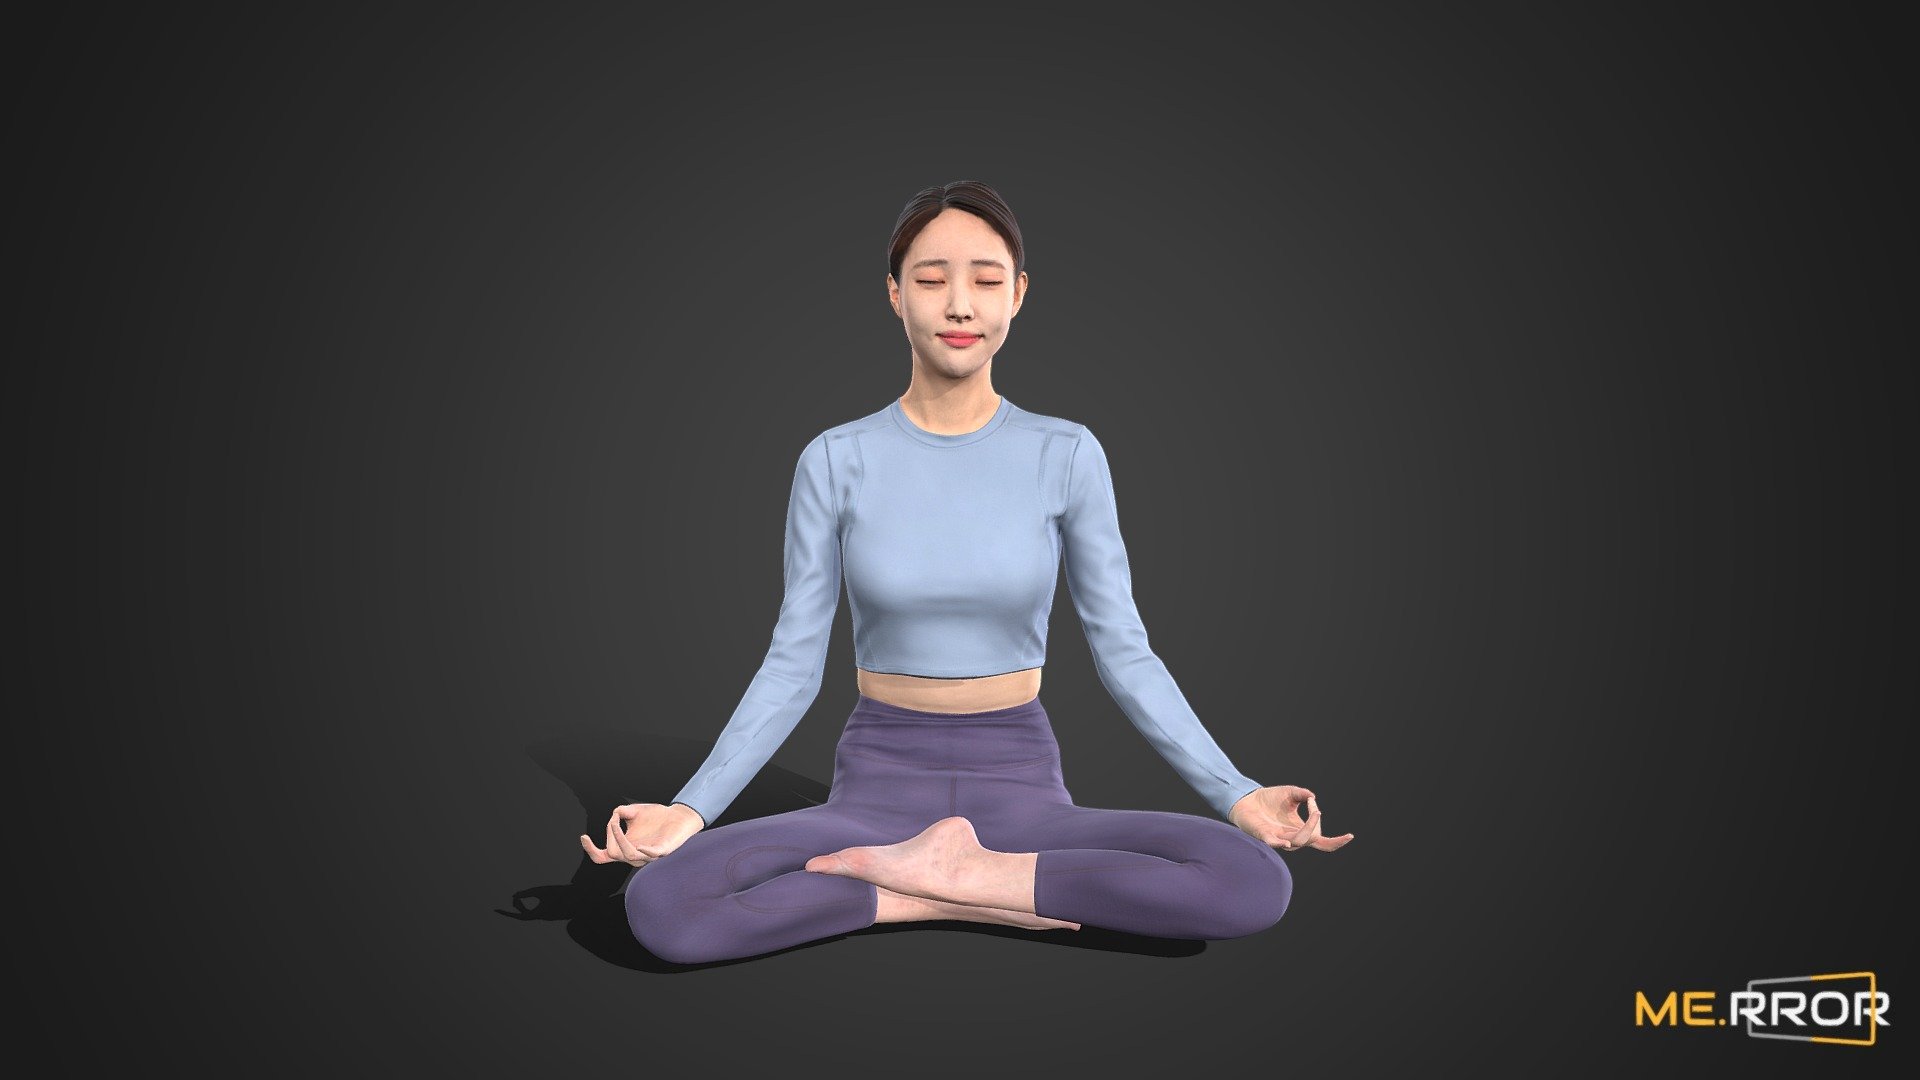 ME.RROR


From 3D models of Asian individuals to a fresh selection of free assets available each month - explore a richer diversity of photorealistic 3D assets at the ME.RROR asset store!

https://me-rror.com/store




[Model Info]




Model Formats : FBX, MAX


Texture Maps (8K) : Diffuse, Normal




Find Scanned - 2M poly version here: https://sketchfab.com/3d-models/asian-woman-scan-posed-20-2m-poly-2bd98abc4044433a8a2387c4d9f16e7a



If you encounter any problems using this model, please feel free to contact us. We'd be glad to help you.



[About ME.RROR]

Step into the future with ME.RROR, South Korea's leading 3D specialist. Bespoke creations are not just possible; they are our specialty.

Service areas:




3D scanning

3D modeling

Virtual human creation

Inquiries: https://merror.channel.io/lounge - [Game-ready] Asian Woman Scan_Posed 21 - Buy Royalty Free 3D model by ME.RROR Studio (@merror) 3d model